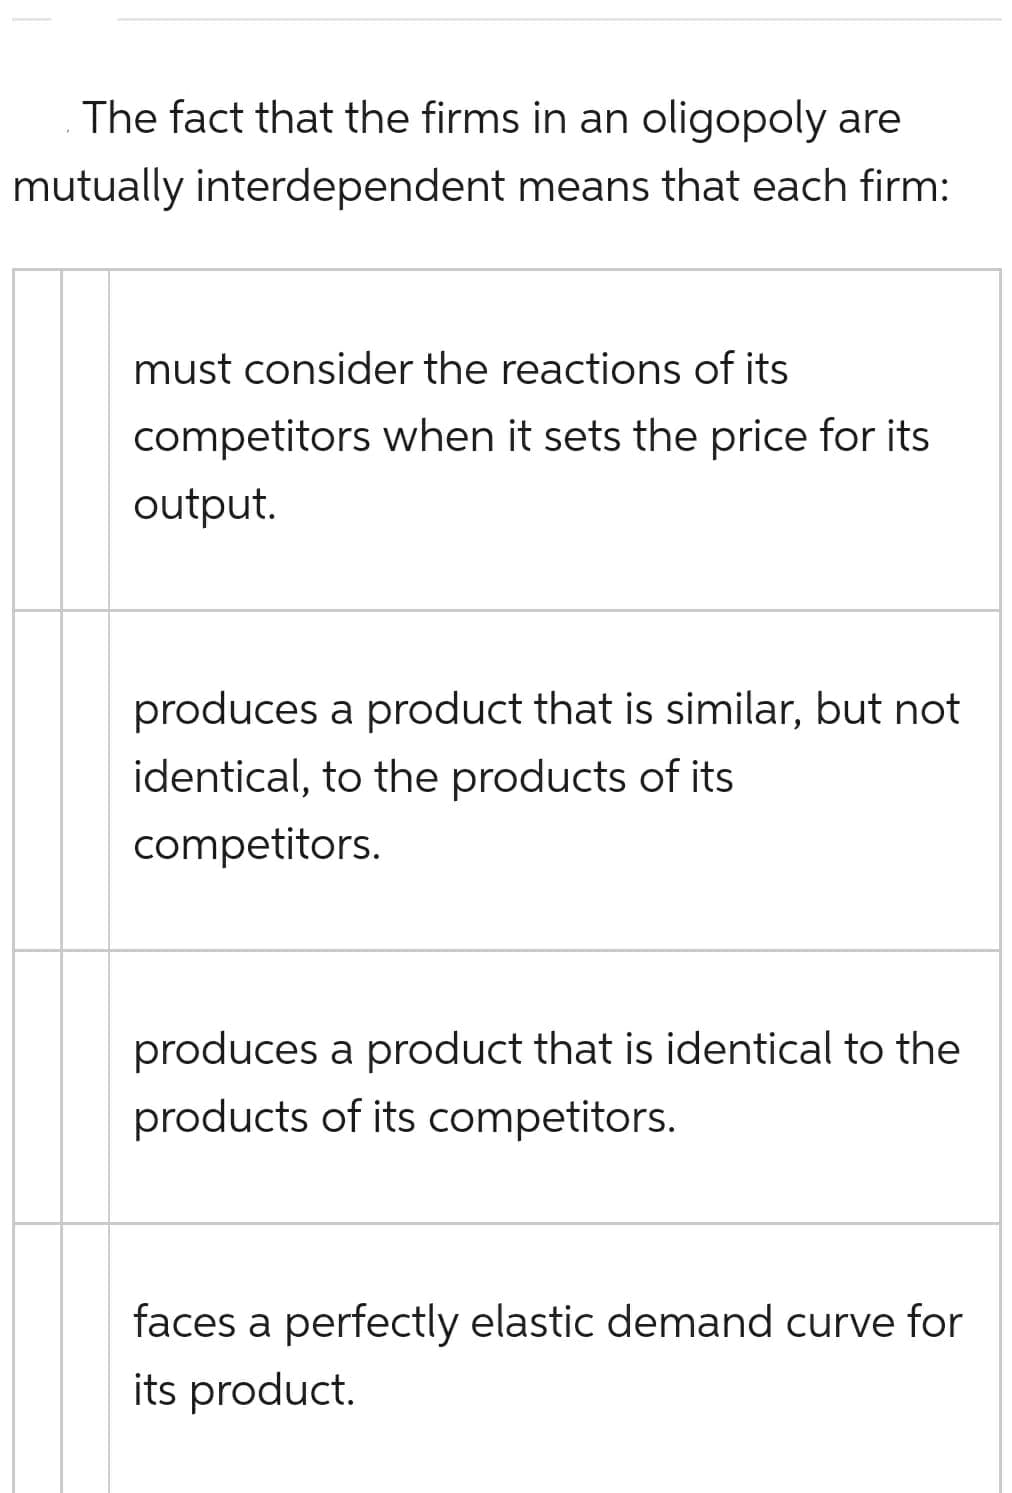 The fact that the firms in an oligopoly are
mutually interdependent means that each firm:
must consider the reactions of its
competitors when it sets the price for its
output.
produces a product that is similar, but not
identical, to the products of its
competitors.
produces a product that is identical to the
products of its competitors.
faces a perfectly elastic demand curve for
its product.